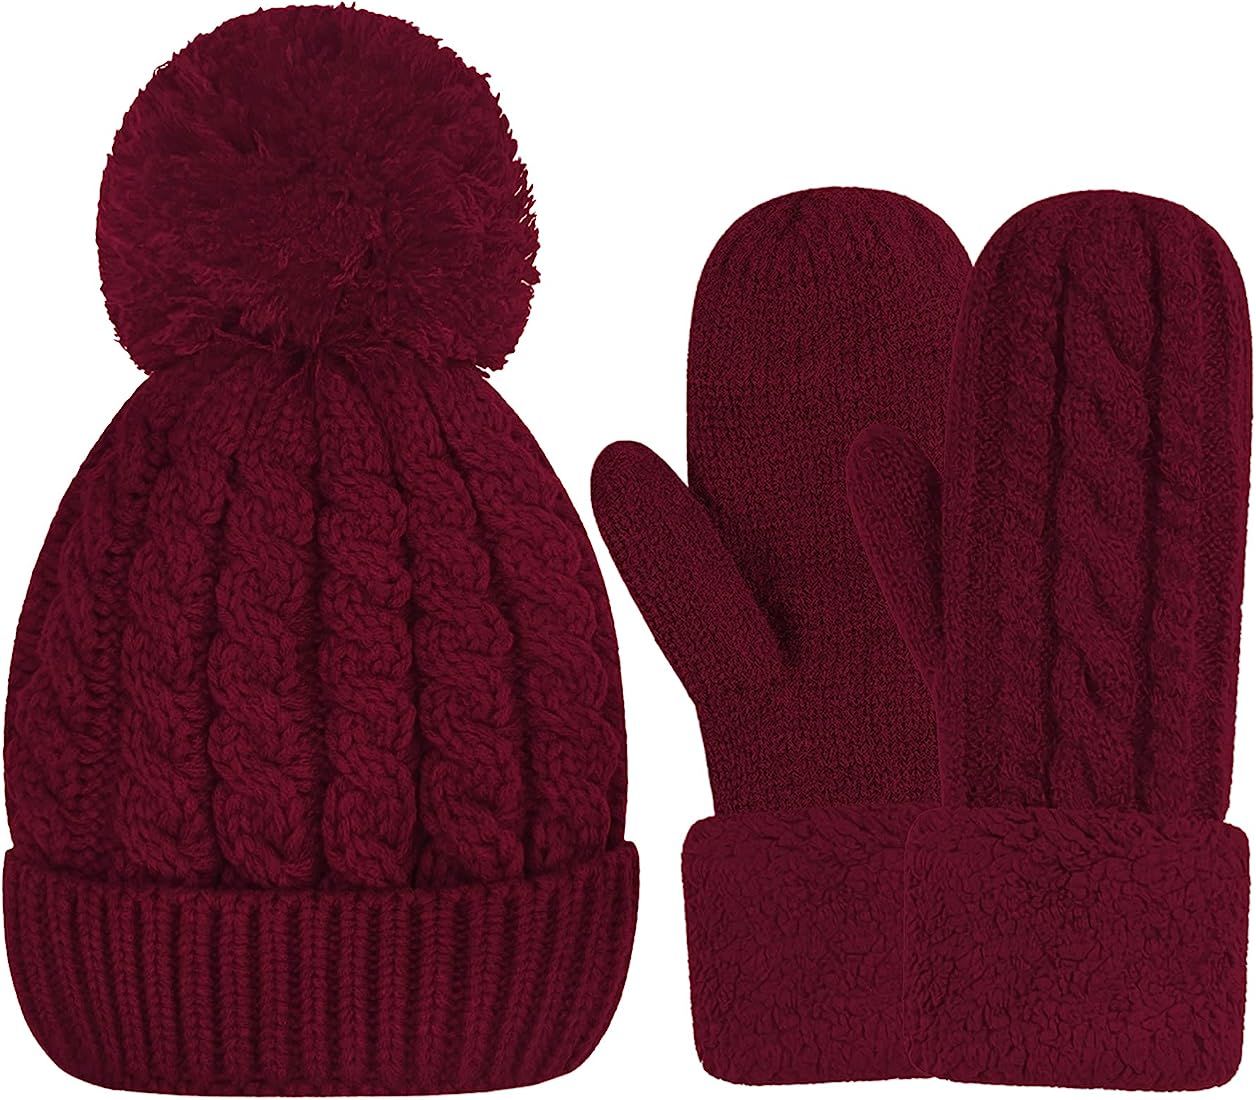 Winter gloves Warm Lining - Cozy Wool Knit Thick Gloves Mittens, Amazon Fashion | Amazon (US)